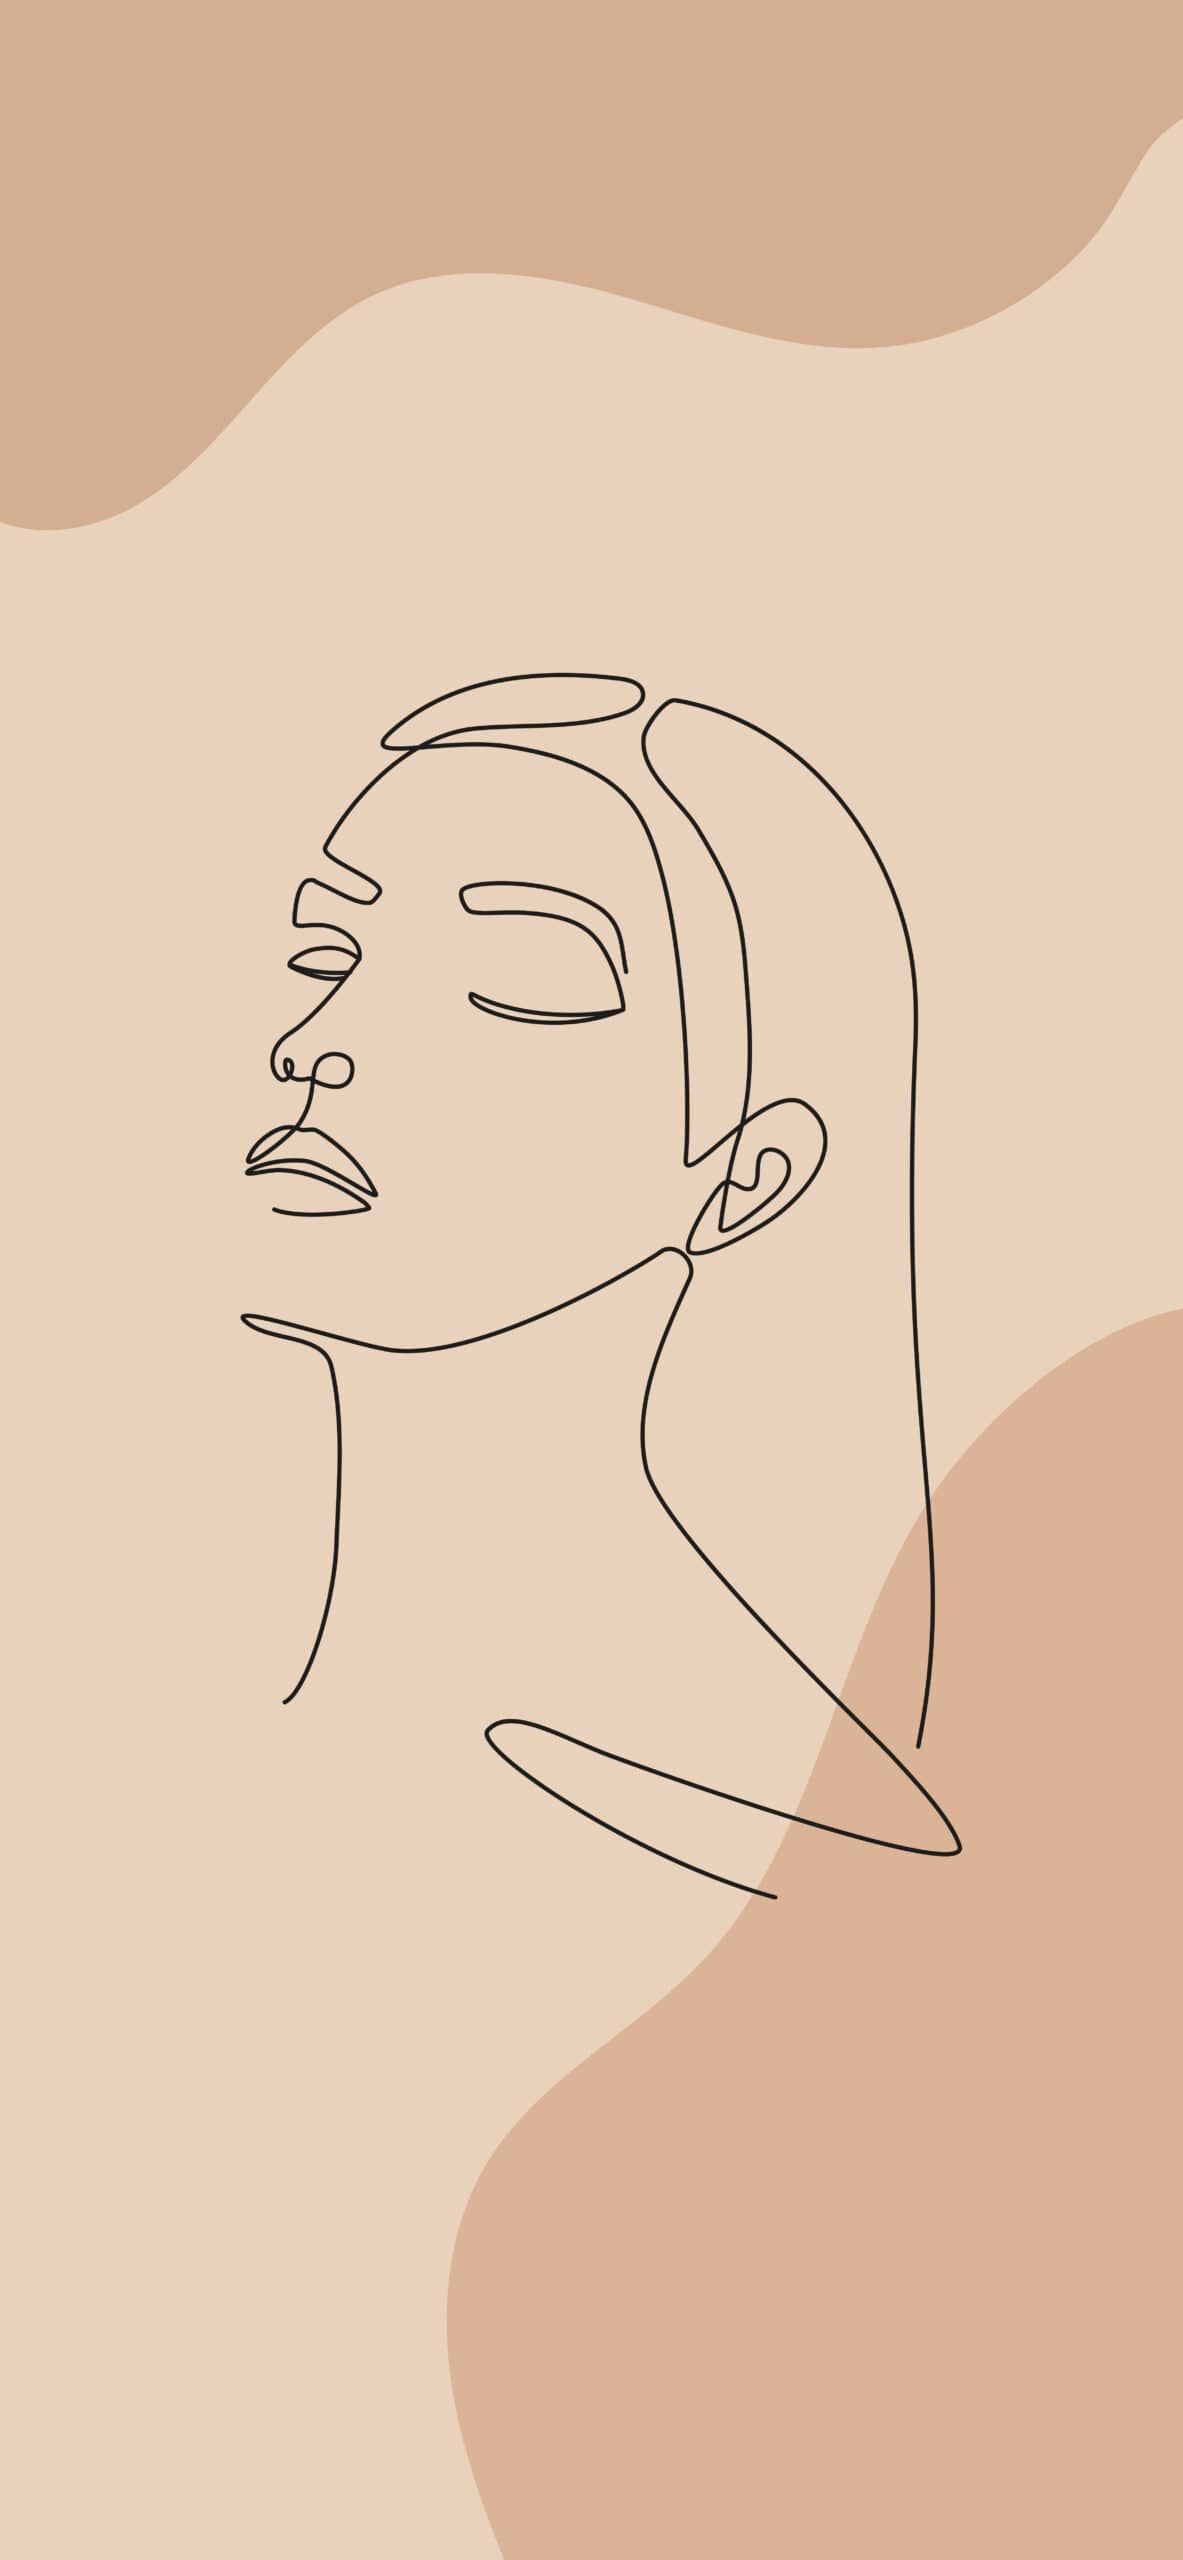 Stunning Line Art Girl iPhone Wallpaper and Wall Art You Need To Get!